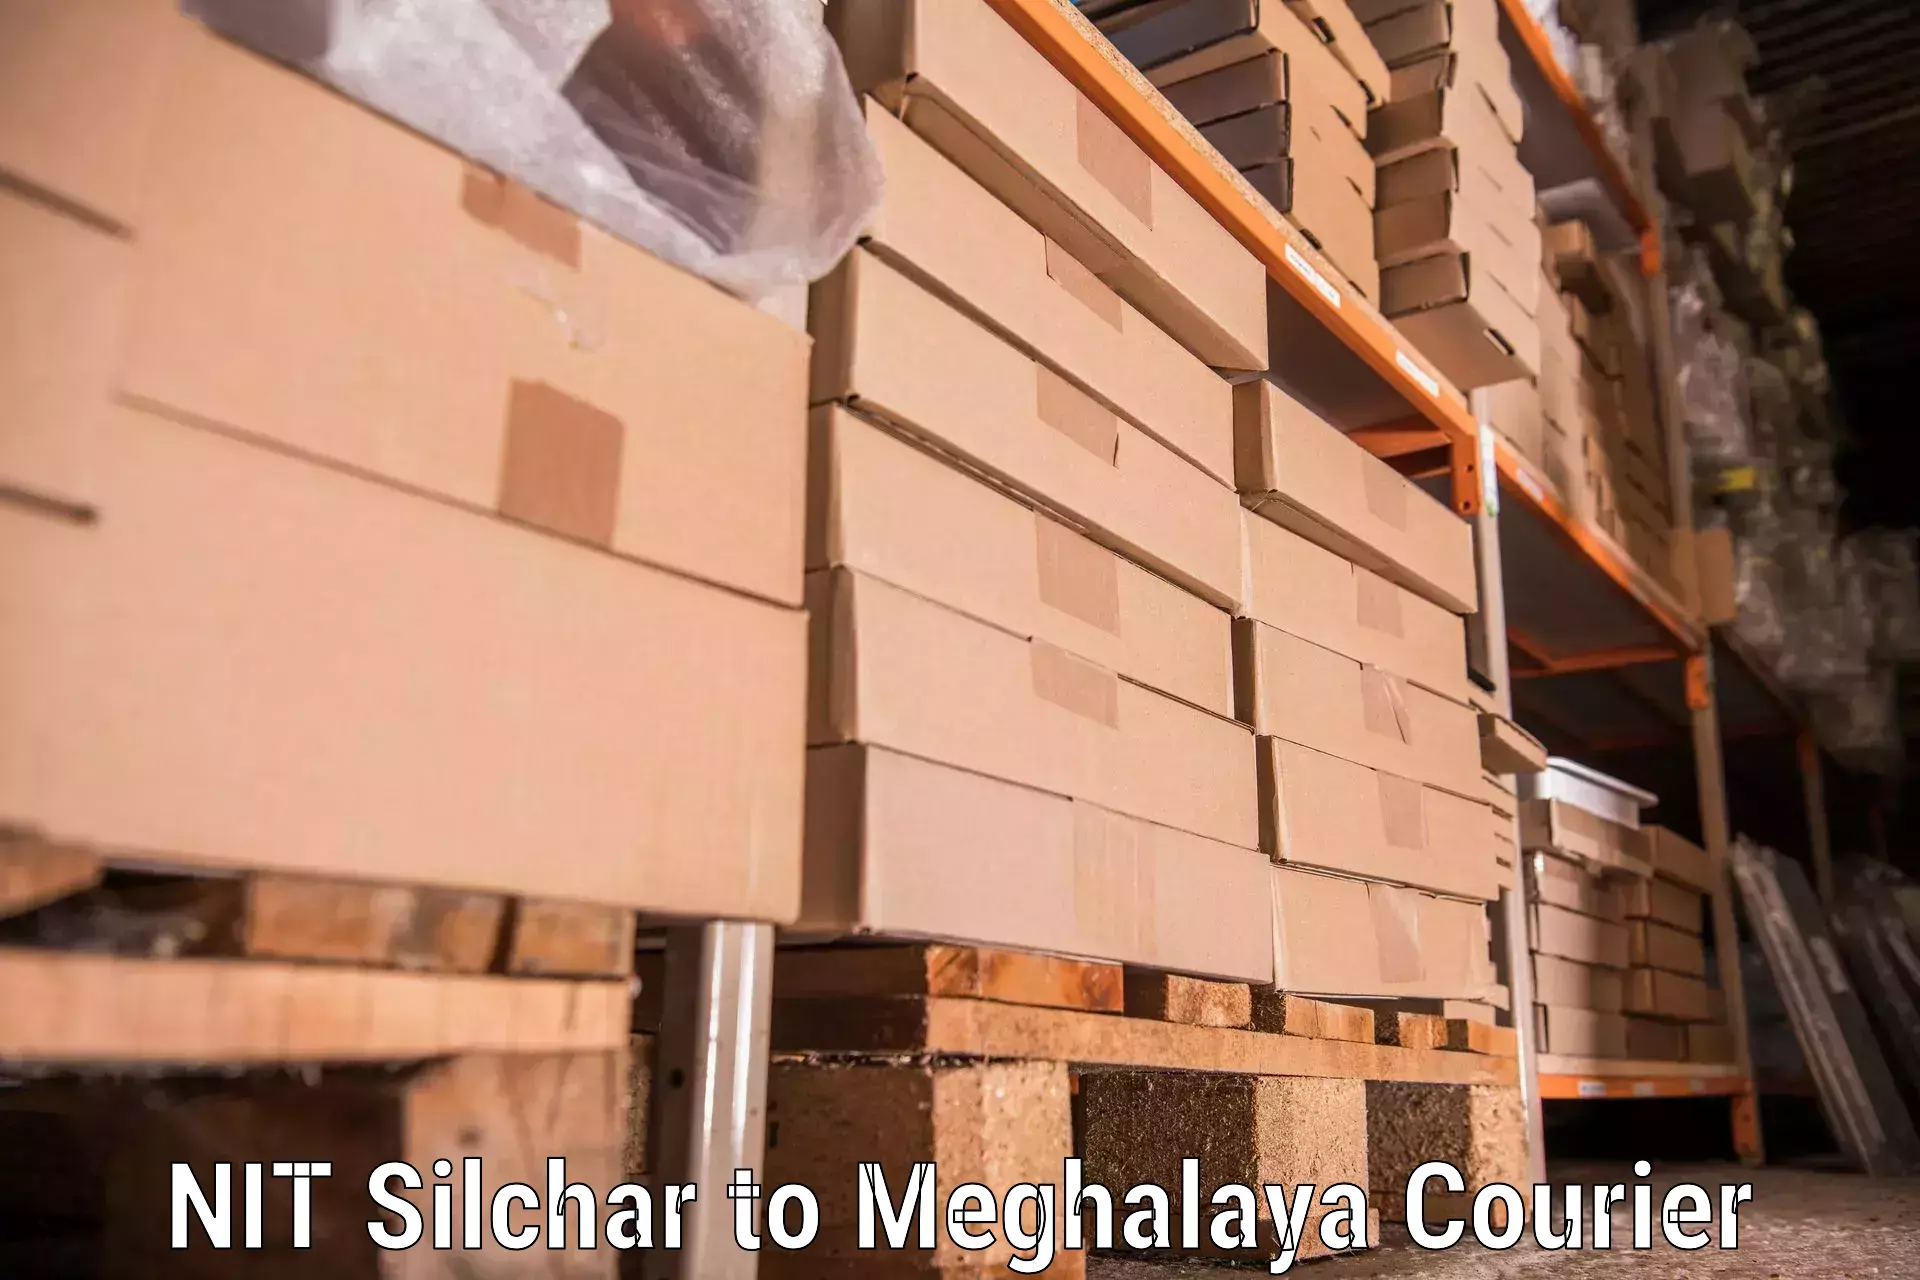 Quality moving company NIT Silchar to Jaintia Hills